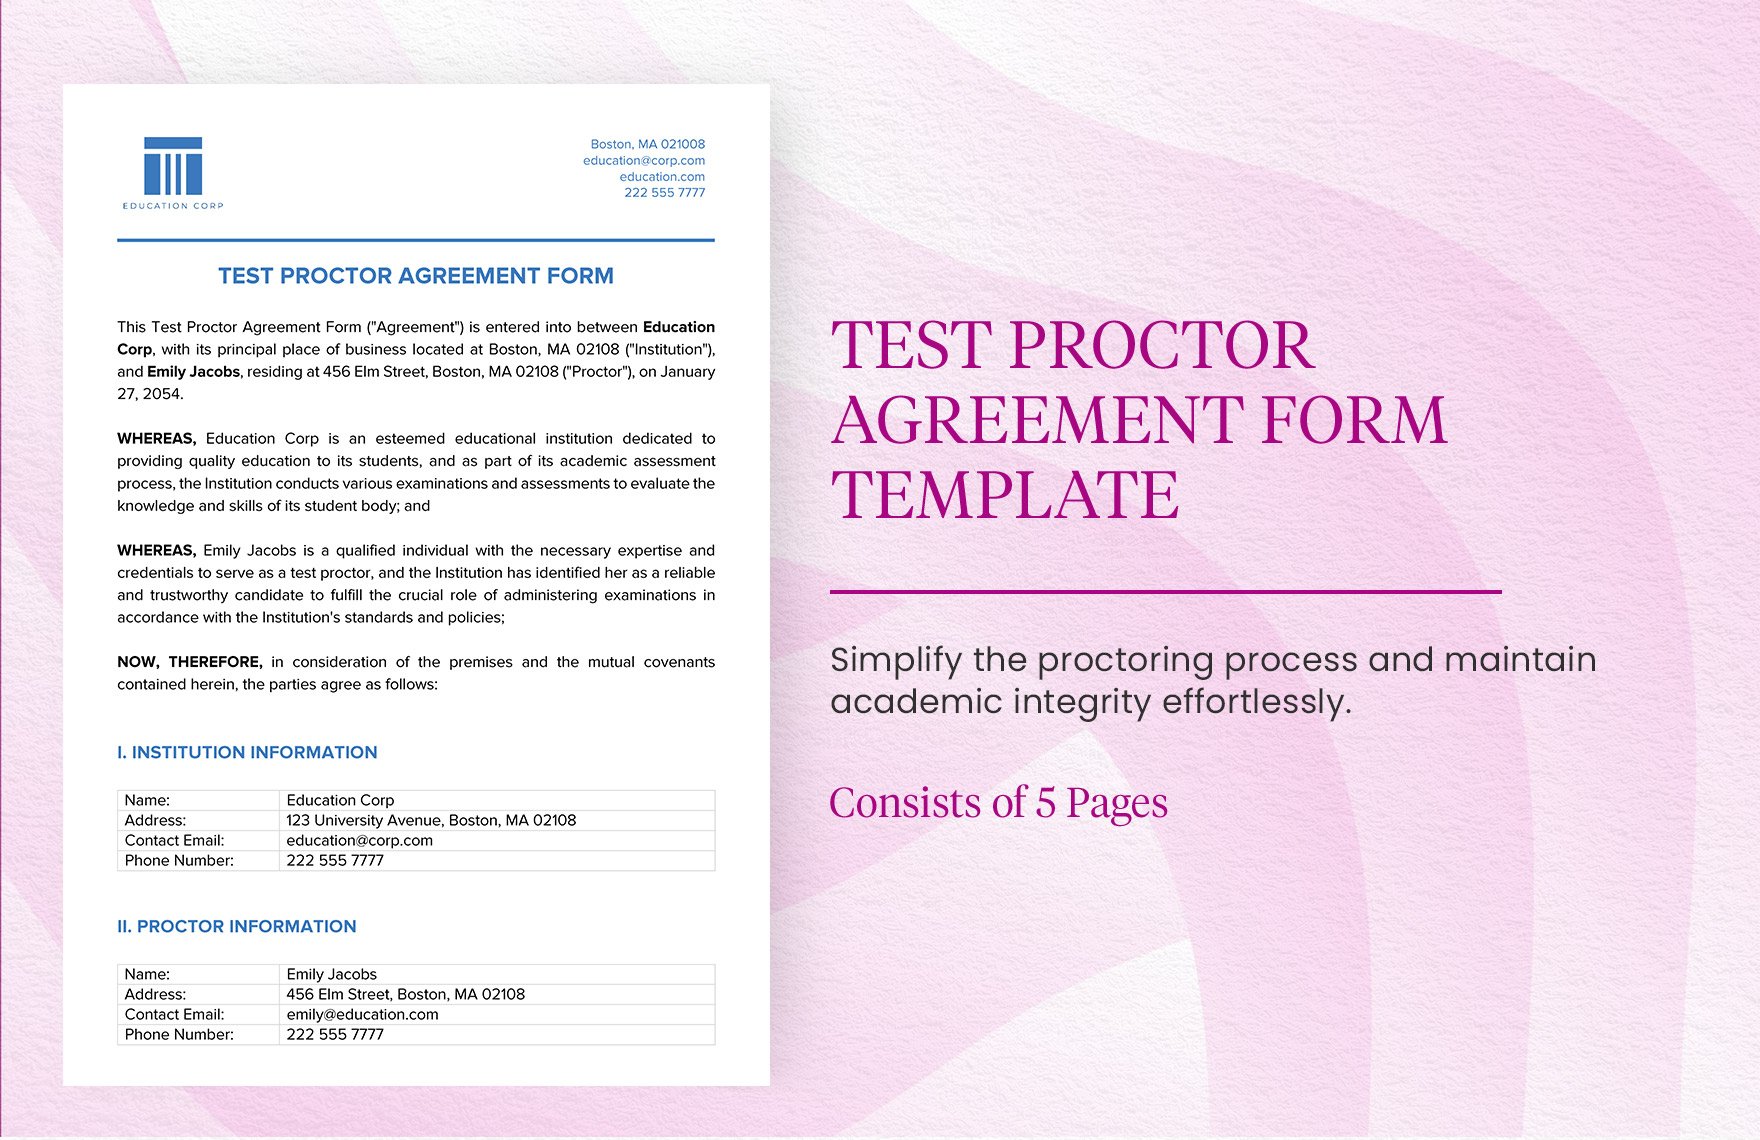 Test Proctor Agreement Form Template